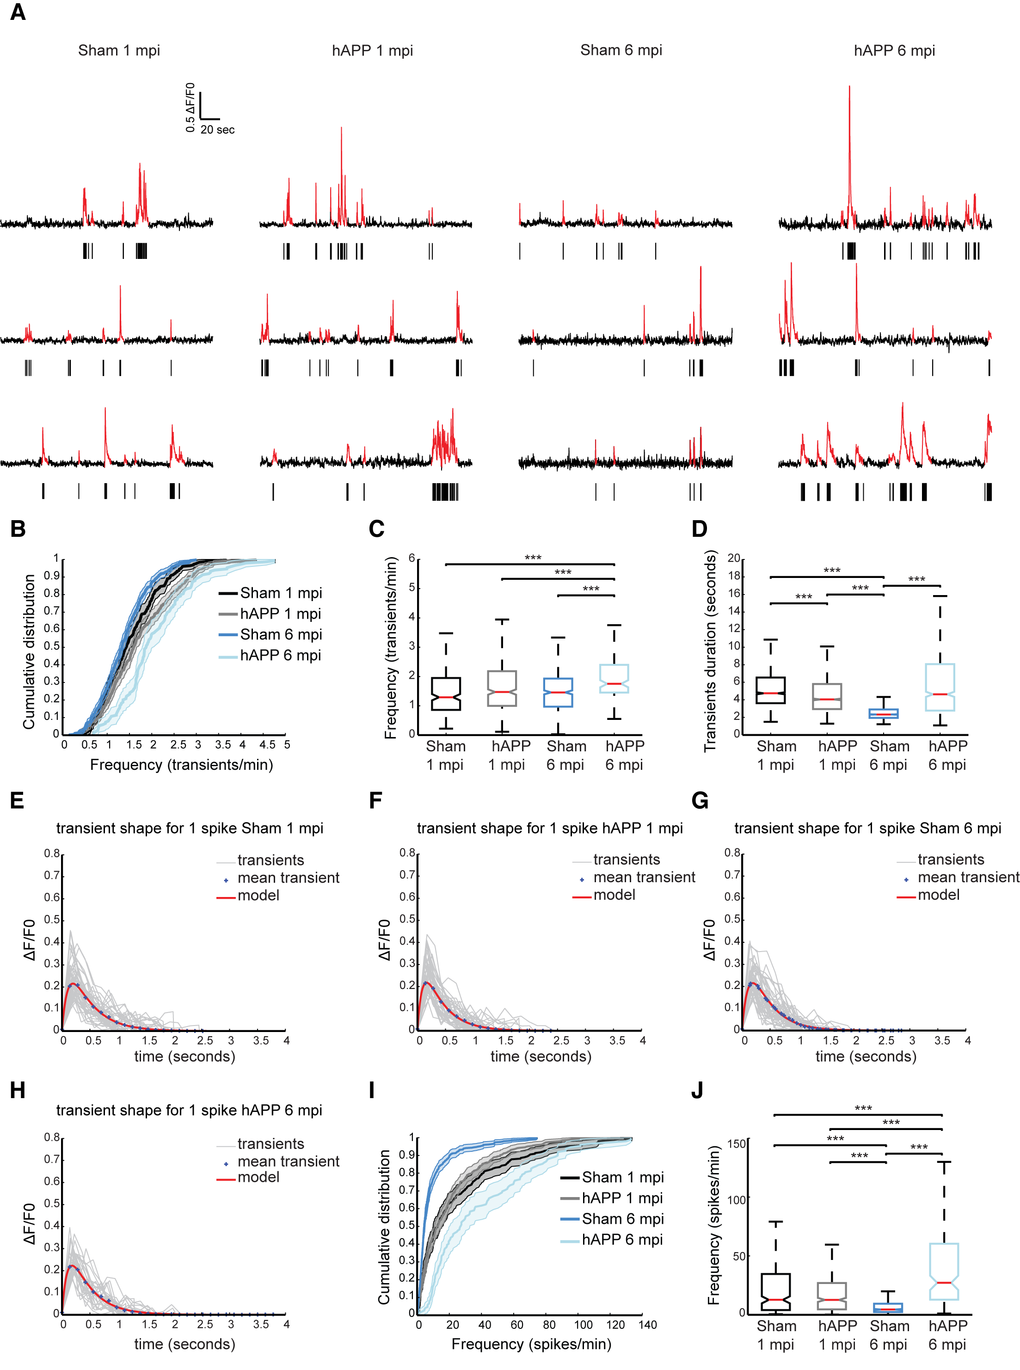 Higher rates of neuronal activity in layer II/III of PrLC in AAV-hAPP-SLA injected mice. (A) Representative spontaneous Ca2+ transients of sham-operated mice and hAPP mice and corresponding raster plots 1 and 6 mpi. (B) Population averaged cumulative plot of the distribution of spontaneous transients/min. (C) Median frequency of spontaneous calcium transients/min of the different mouse groups. (D) Median transient durations. (E-H) Kernel estimation for the different mouse groups. The kernel (model) is obtained from the fitting of an alpha function on the mean unitary calcium transient (crosses). In light gray, individual unitary calcium transients used to compute the mean for sham-operated and hAPP mice at 1 and 6 mpi of the vector. (I) Population averaged cumulative histograms of the distribution of spontaneous spikes/min. (J) Median frequency of spontaneous calcium spikes/min of the different mouse groups (n = 4 animals for each group). Kruskal-Wallis test for all comparisons. (*P